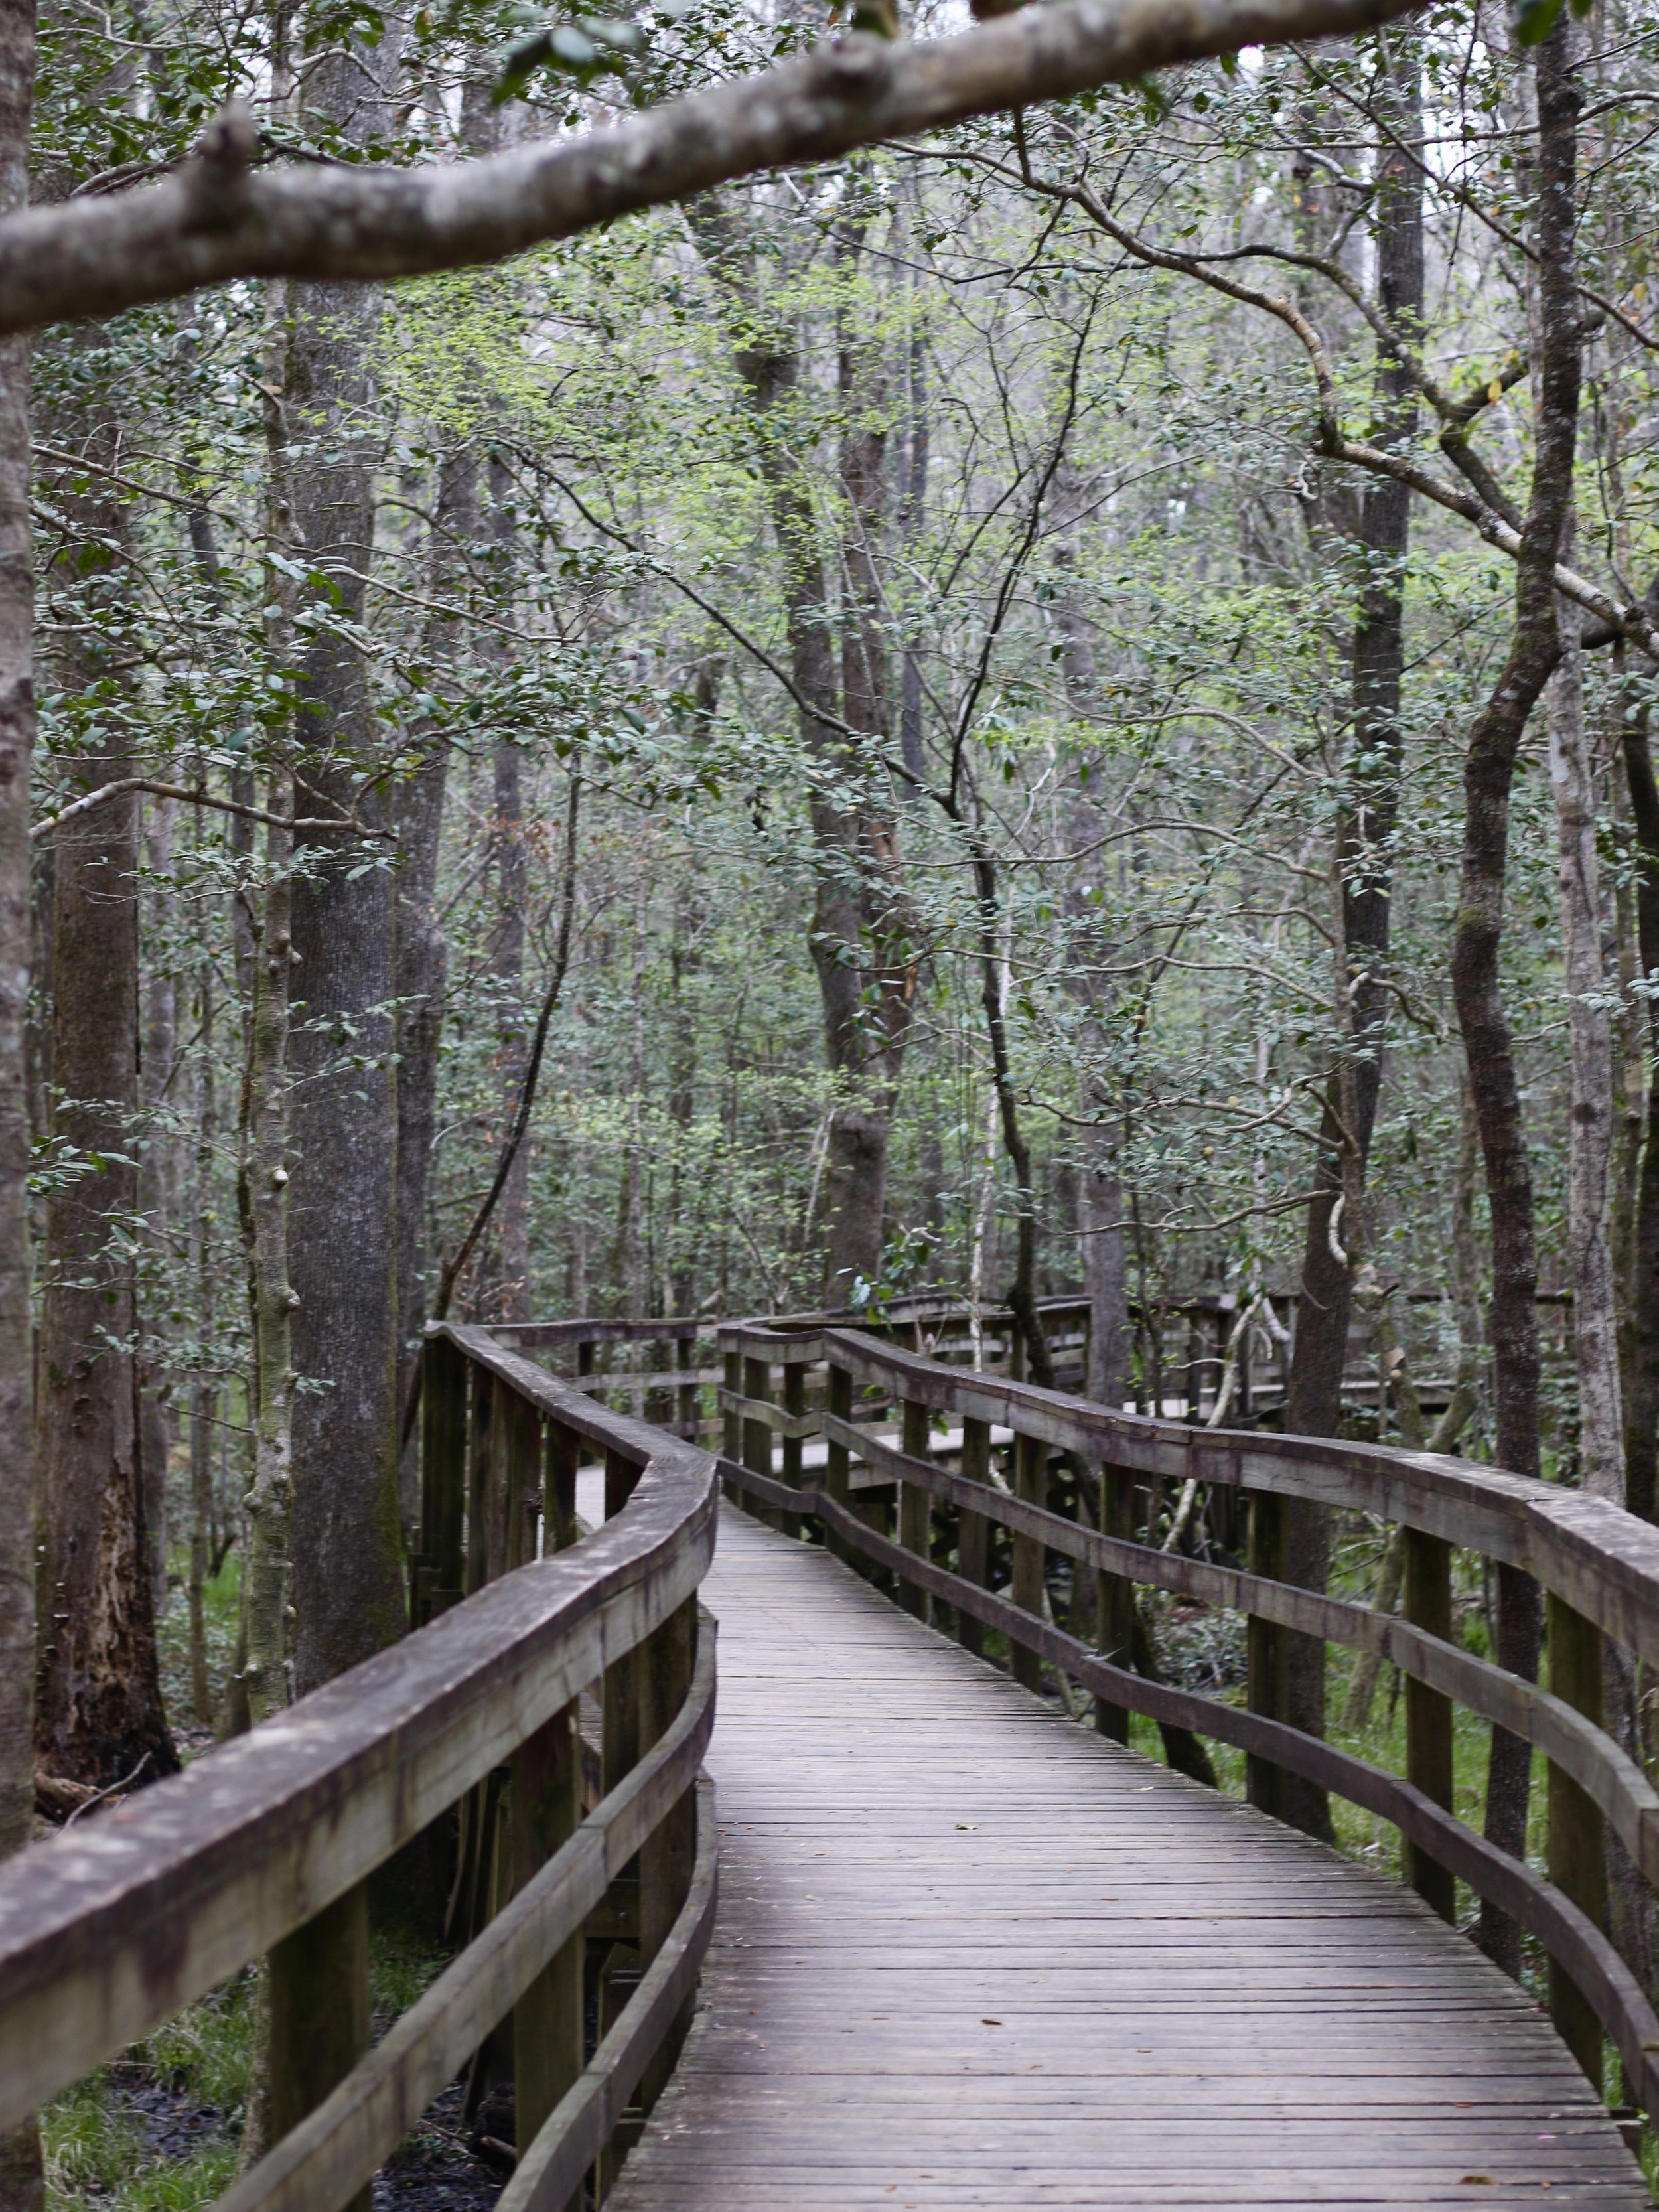  As the first timers, we went on this boardwalk loop trail, an easy 2 and a half mile walk that starts at the visitor center and then ascends into the forest. And it is just so beautiful!  